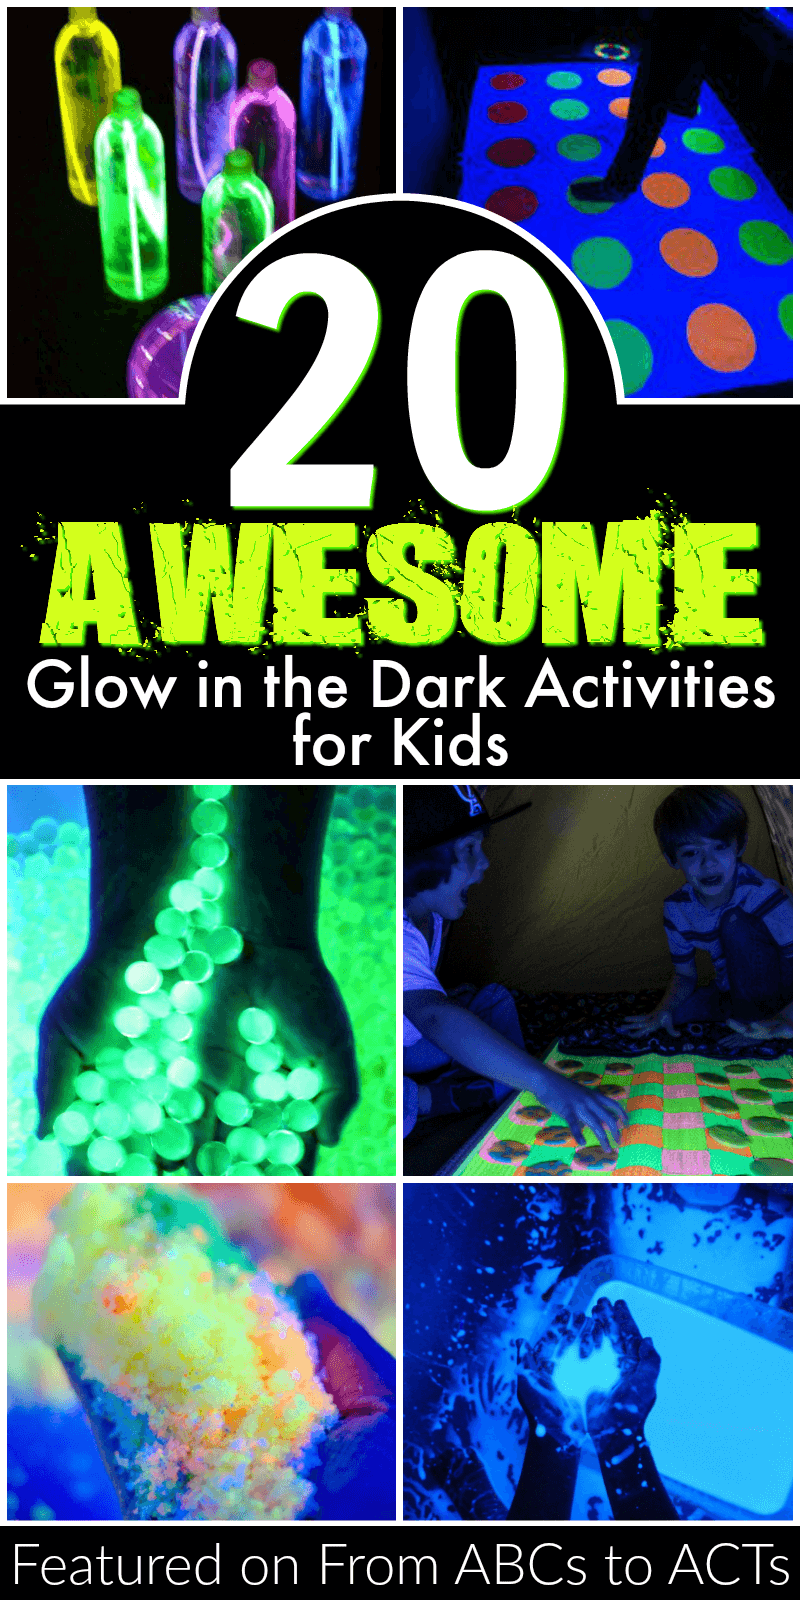 Need to find something for the kids to do this summer? These 20 awesome glow in the dark activities will keep them entertained all season long!